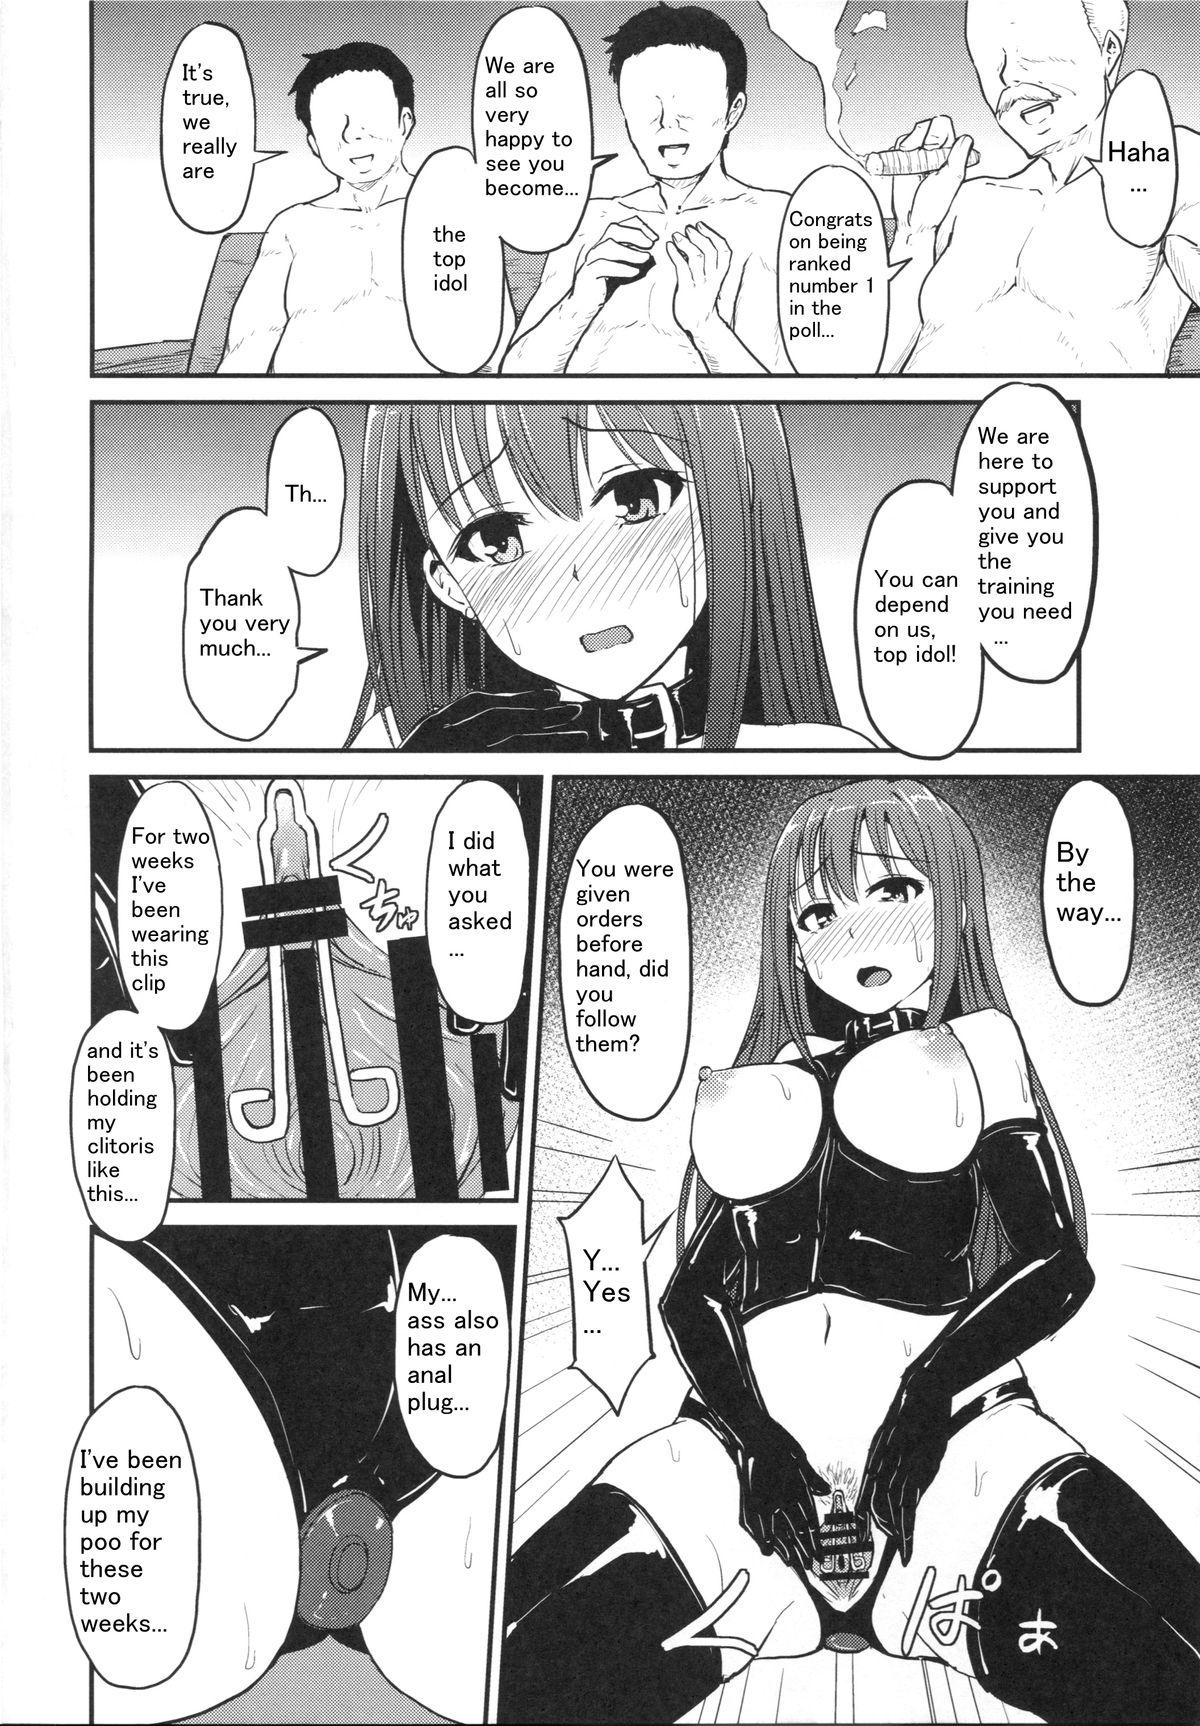 Pervs (C87) [MillionLove (Yayo)] Perfect Lesson 3 -Shibuya Rin Haisetsu Choukyou- | The Perfect Lesson 3 -Shibuya Rin's Excretion Training- (THE IDOLM@STER CINDERELLA GIRLS) [English] [Moko_T] - The idolmaster Porn Amateur - Picture 3